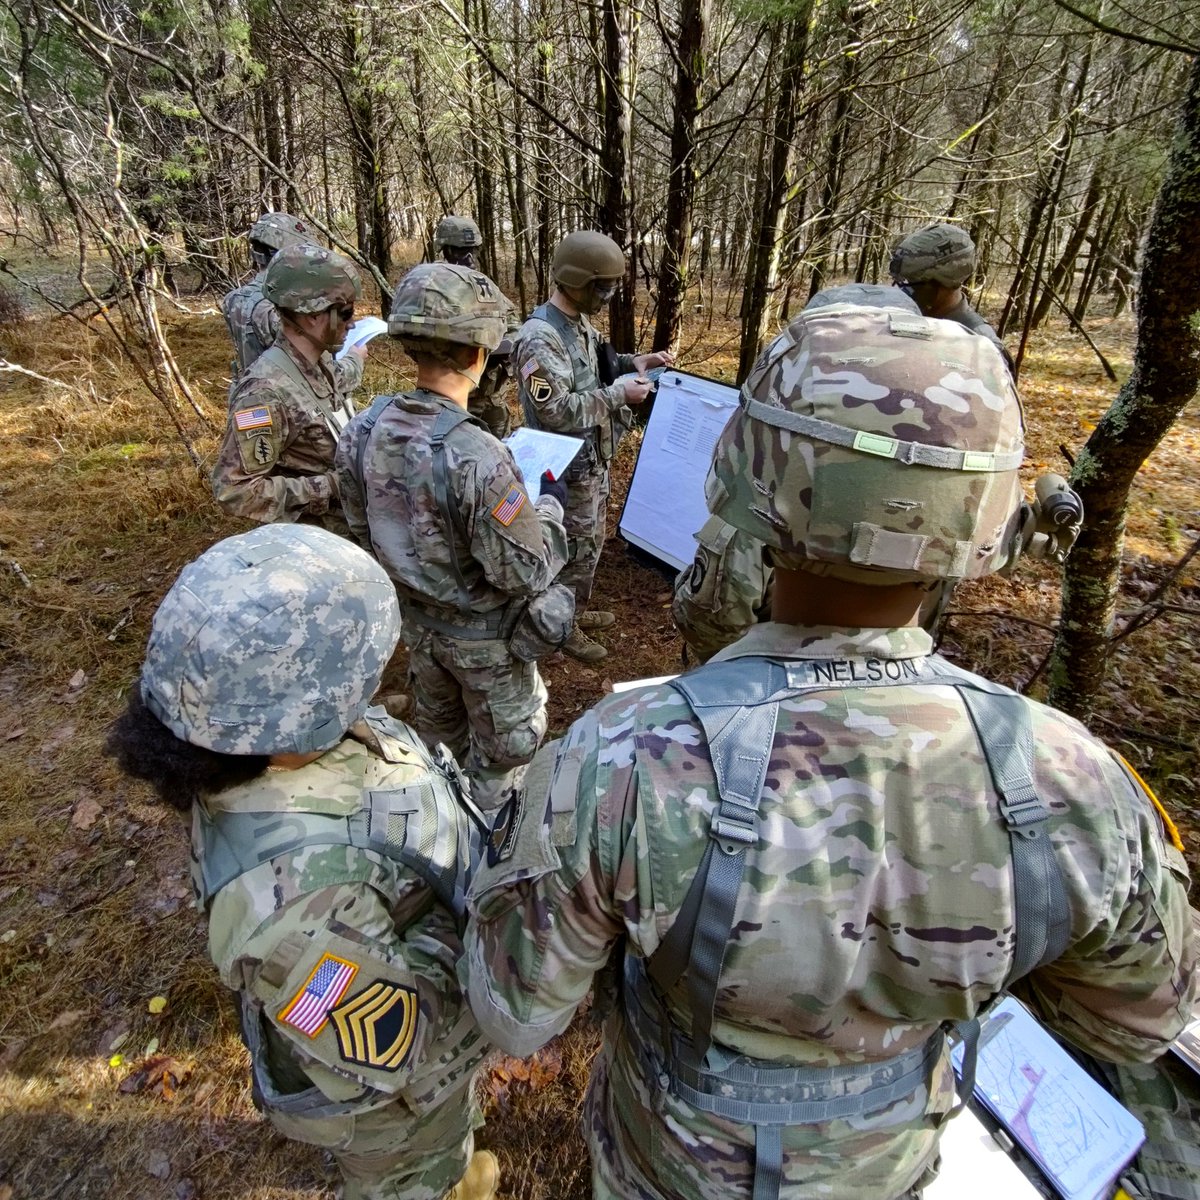 Applying the #TrainTheTrainer concept for future #NCOs to provide training to Soldiers in the #101stAirborneDivision and beyond.

#TrainToLead